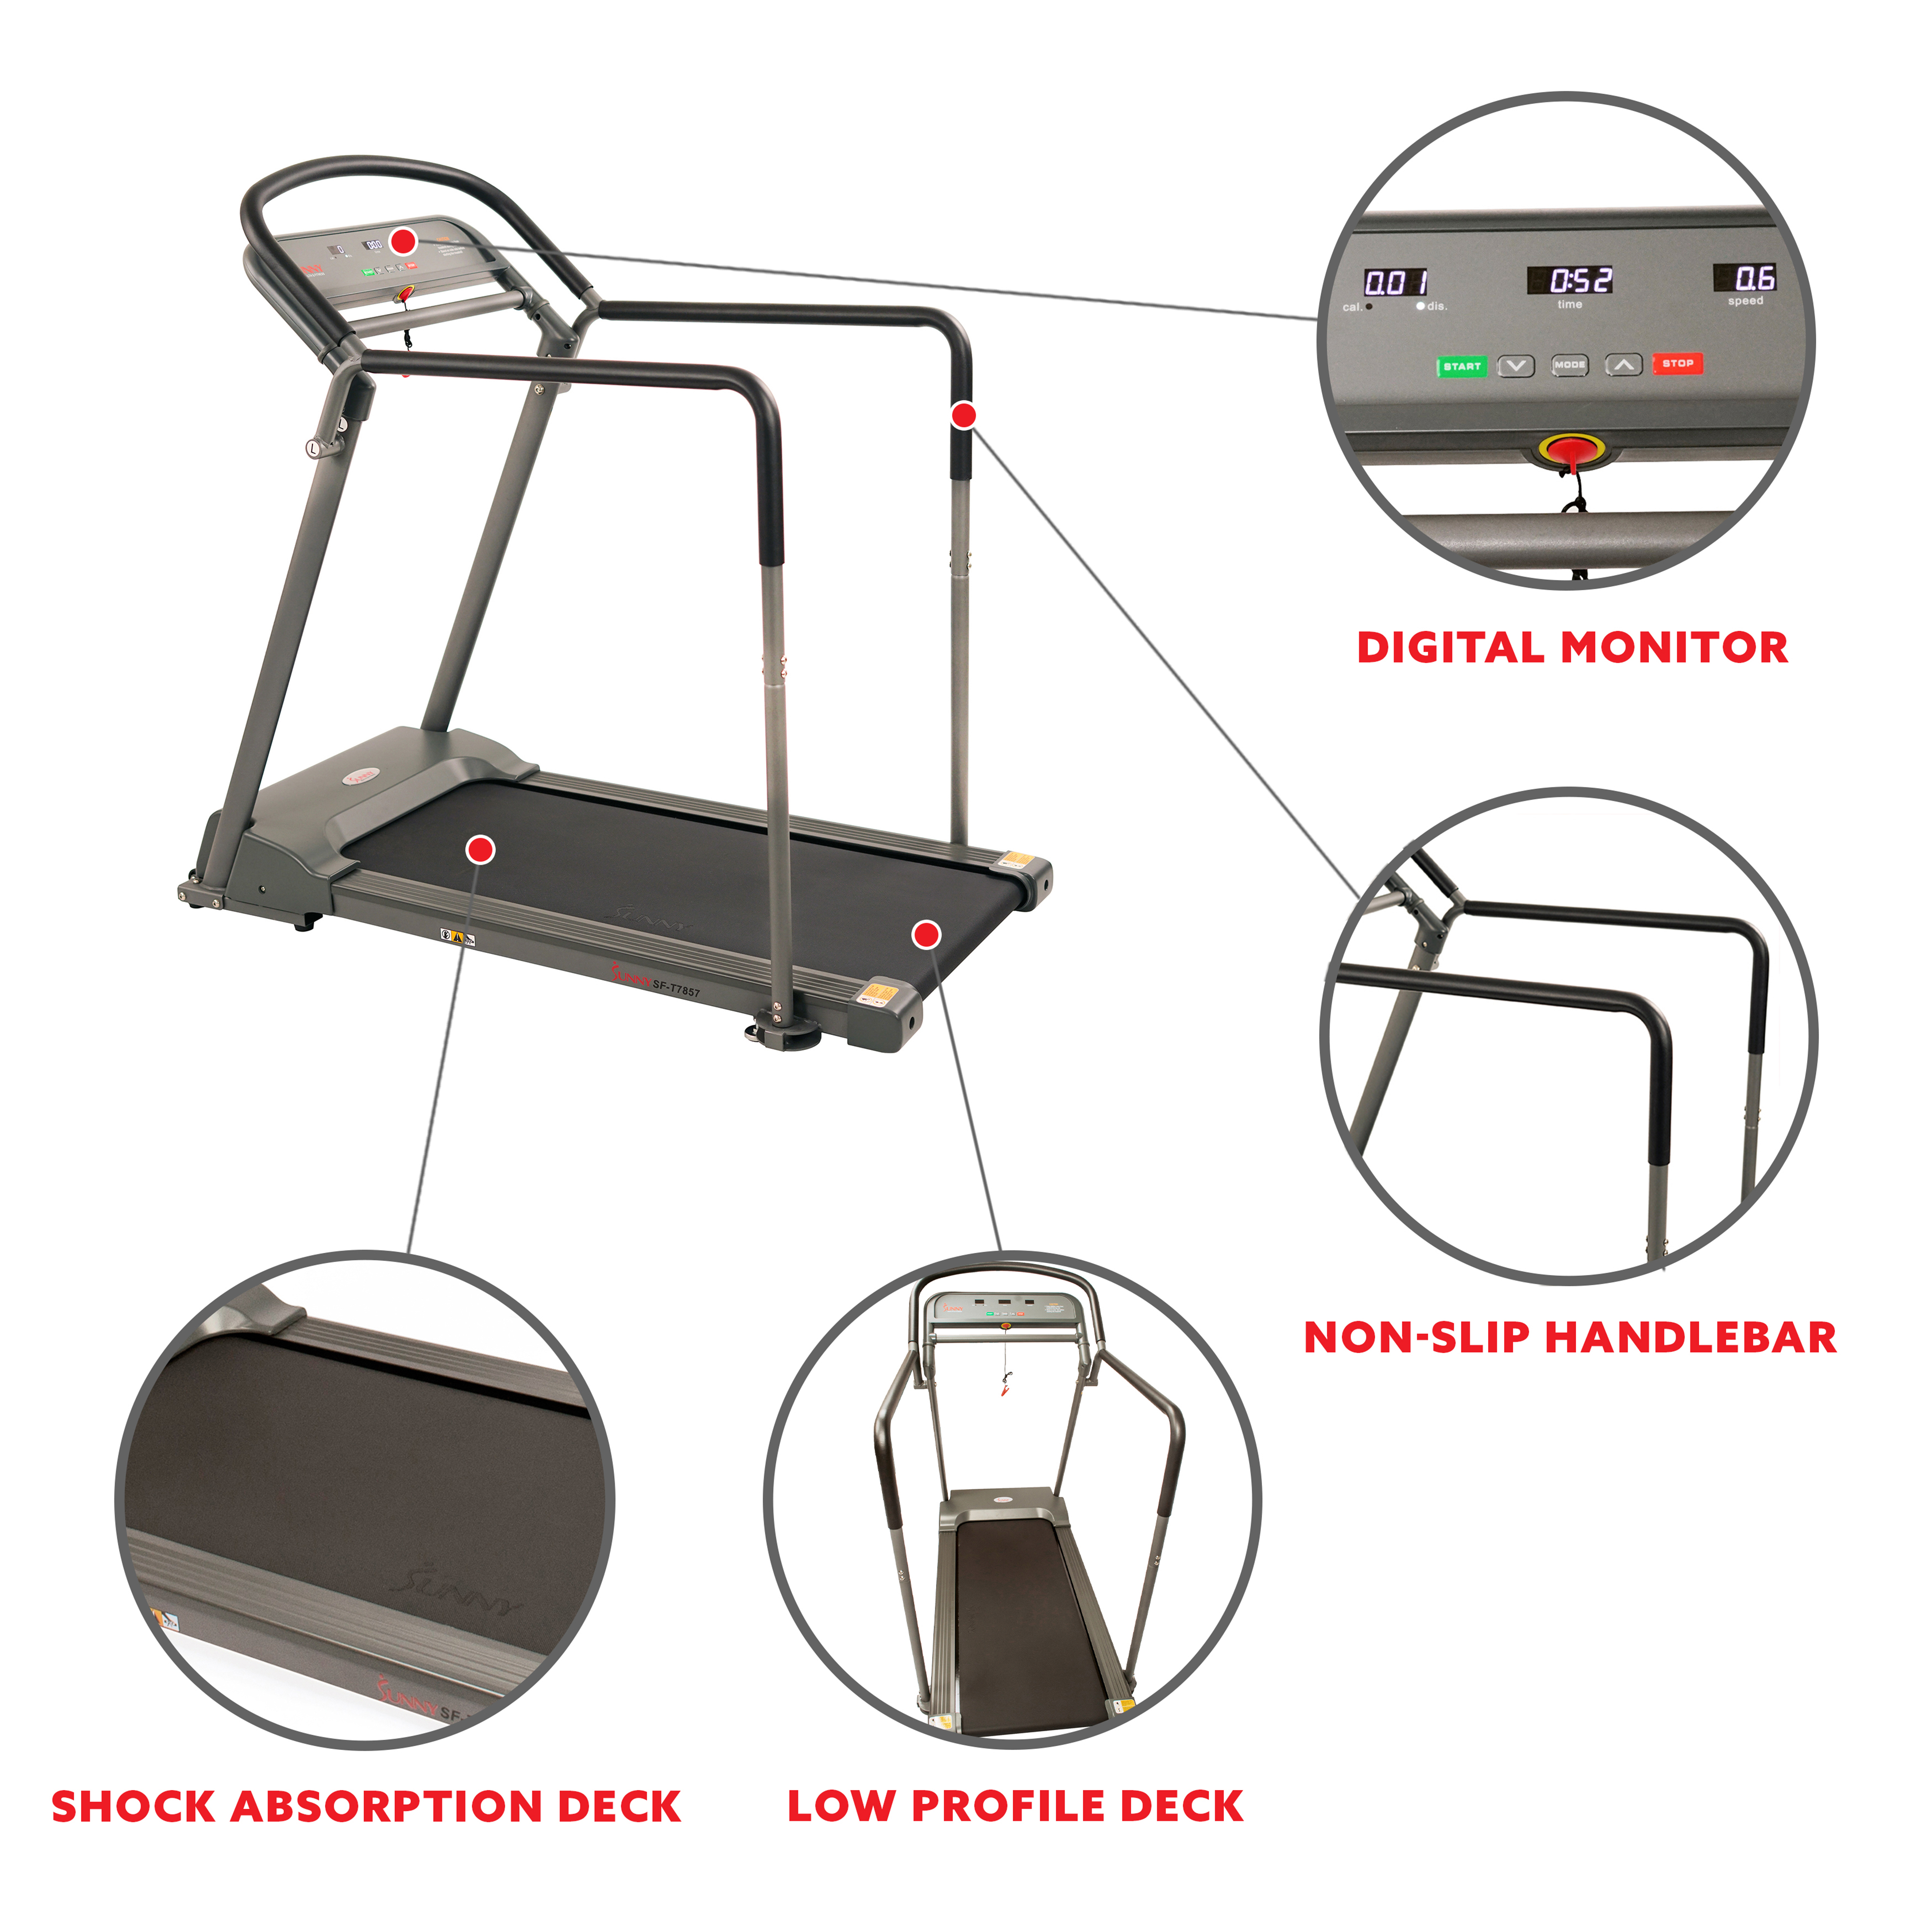 Sunny Health & Fitness Recovery Walking Pad Treadmill Machine, Low Profile Deck, Handrails for Mobility/Balance Support SF-T7857 - image 3 of 9